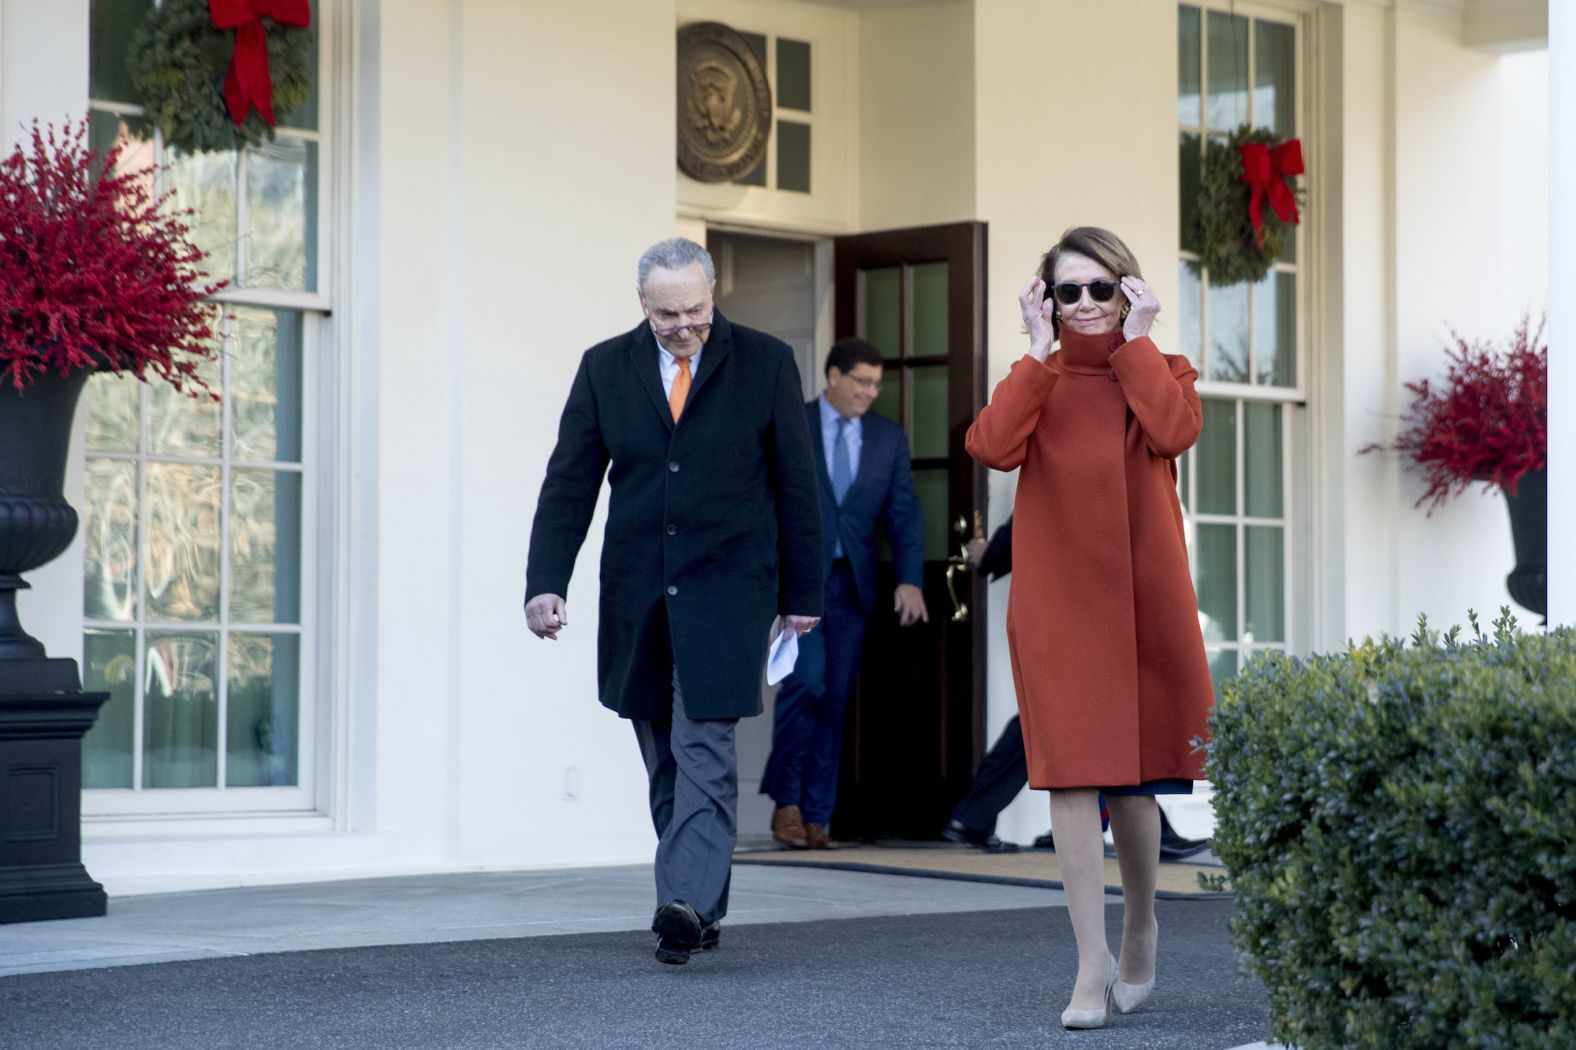 Pelosi and Schumer walk out of the West Wing to speak to members of the media outside of the White House in 2018 following the meeting with President Trump. Pelosi's attire caught the attention of the internet, and the apparent popularity of her coat caused such a stir that the designer, Max Mara, <a href="index.php?page=&url=https%3A%2F%2Fwww.cnn.com%2F2018%2F12%2F13%2Fpolitics%2Fnancy-pelosi-coat-max-mara%2Findex.html" target="_blank">decided to bring it back</a>.